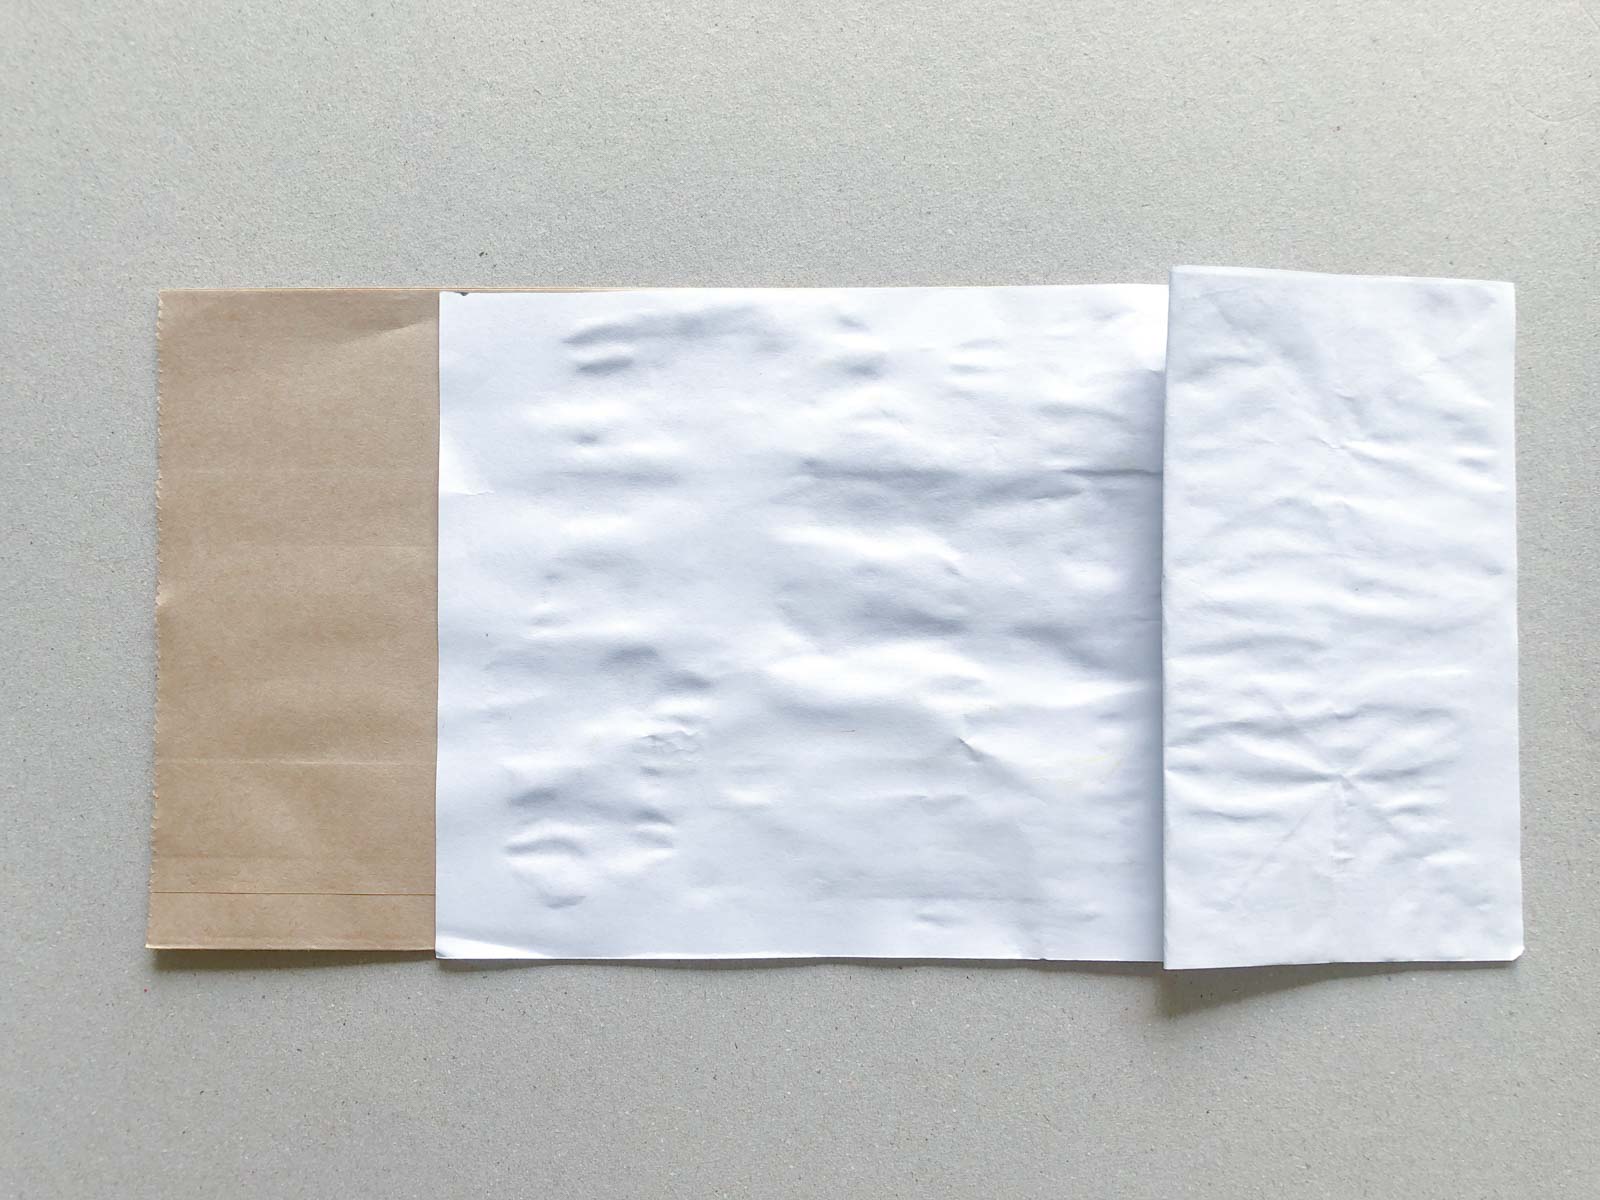 piece of white paper taped on a paper bag